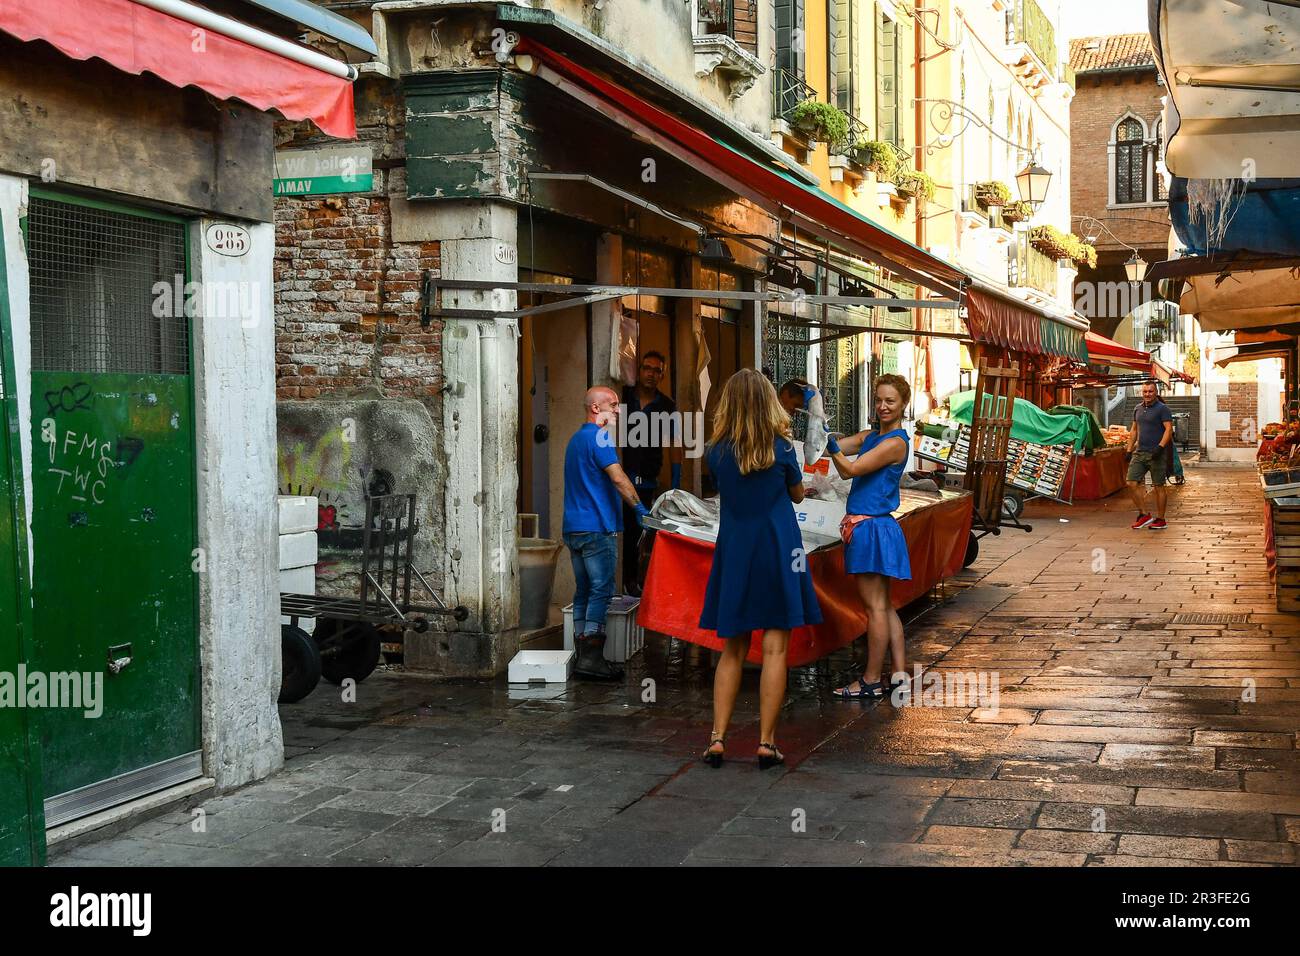 Two young foreign tourists are jokingly chatting with a fishmonger who is selling dogfish at the Fish Market of Rialto in summer, Venice, Veneto Stock Photo